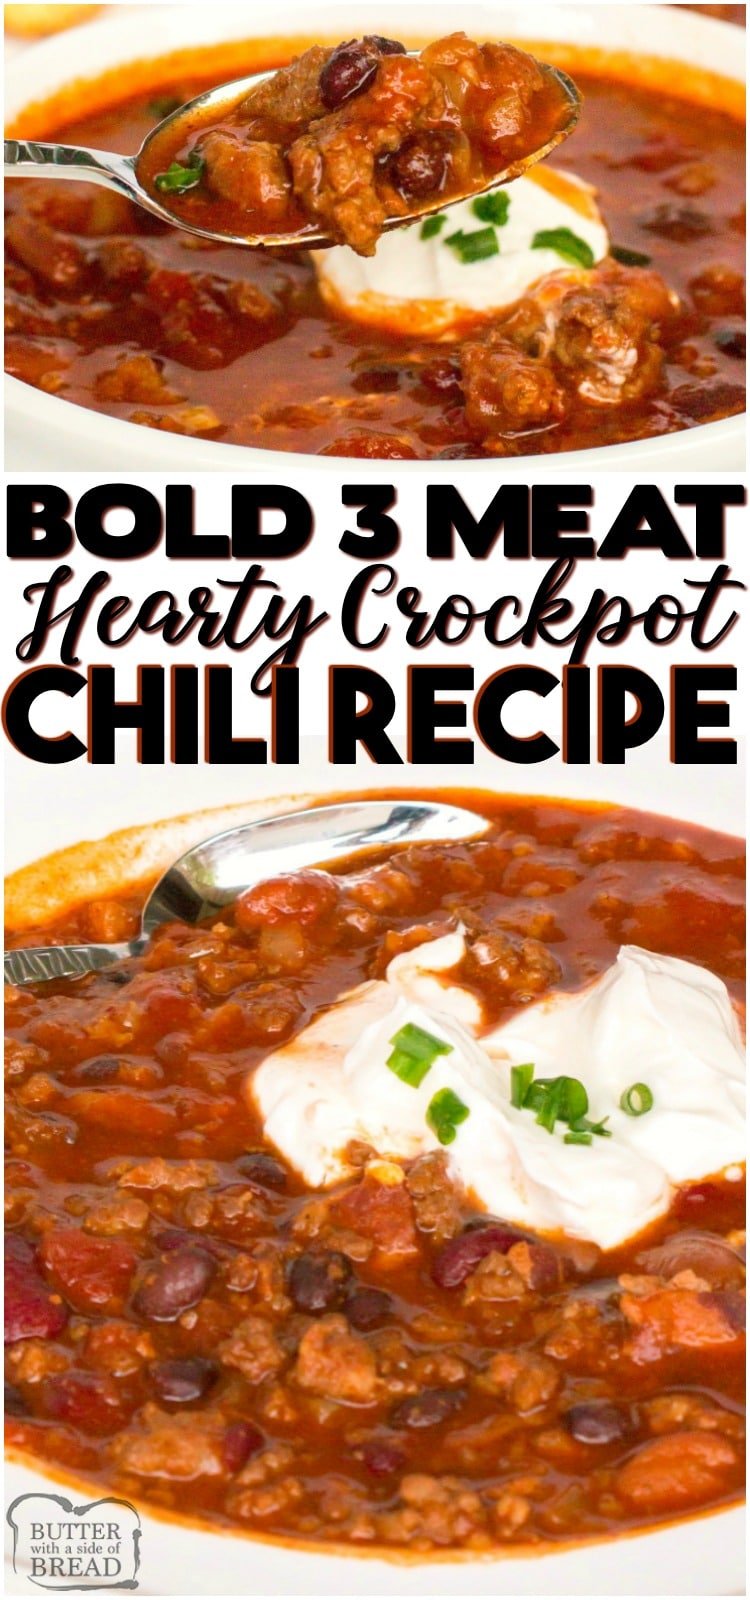 Crockpot Chili recipe made with beef, pork and bacon that has a fantastic bold flavor. This 3 meat slow cooker chili is the best chili recipe for cool nights, tailgating, or both. #chili #crockpot #slowcooker #beef #pork #bacon #protein #meat #dinner #recipe from BUTTER WITH A SIDE OF BREAD